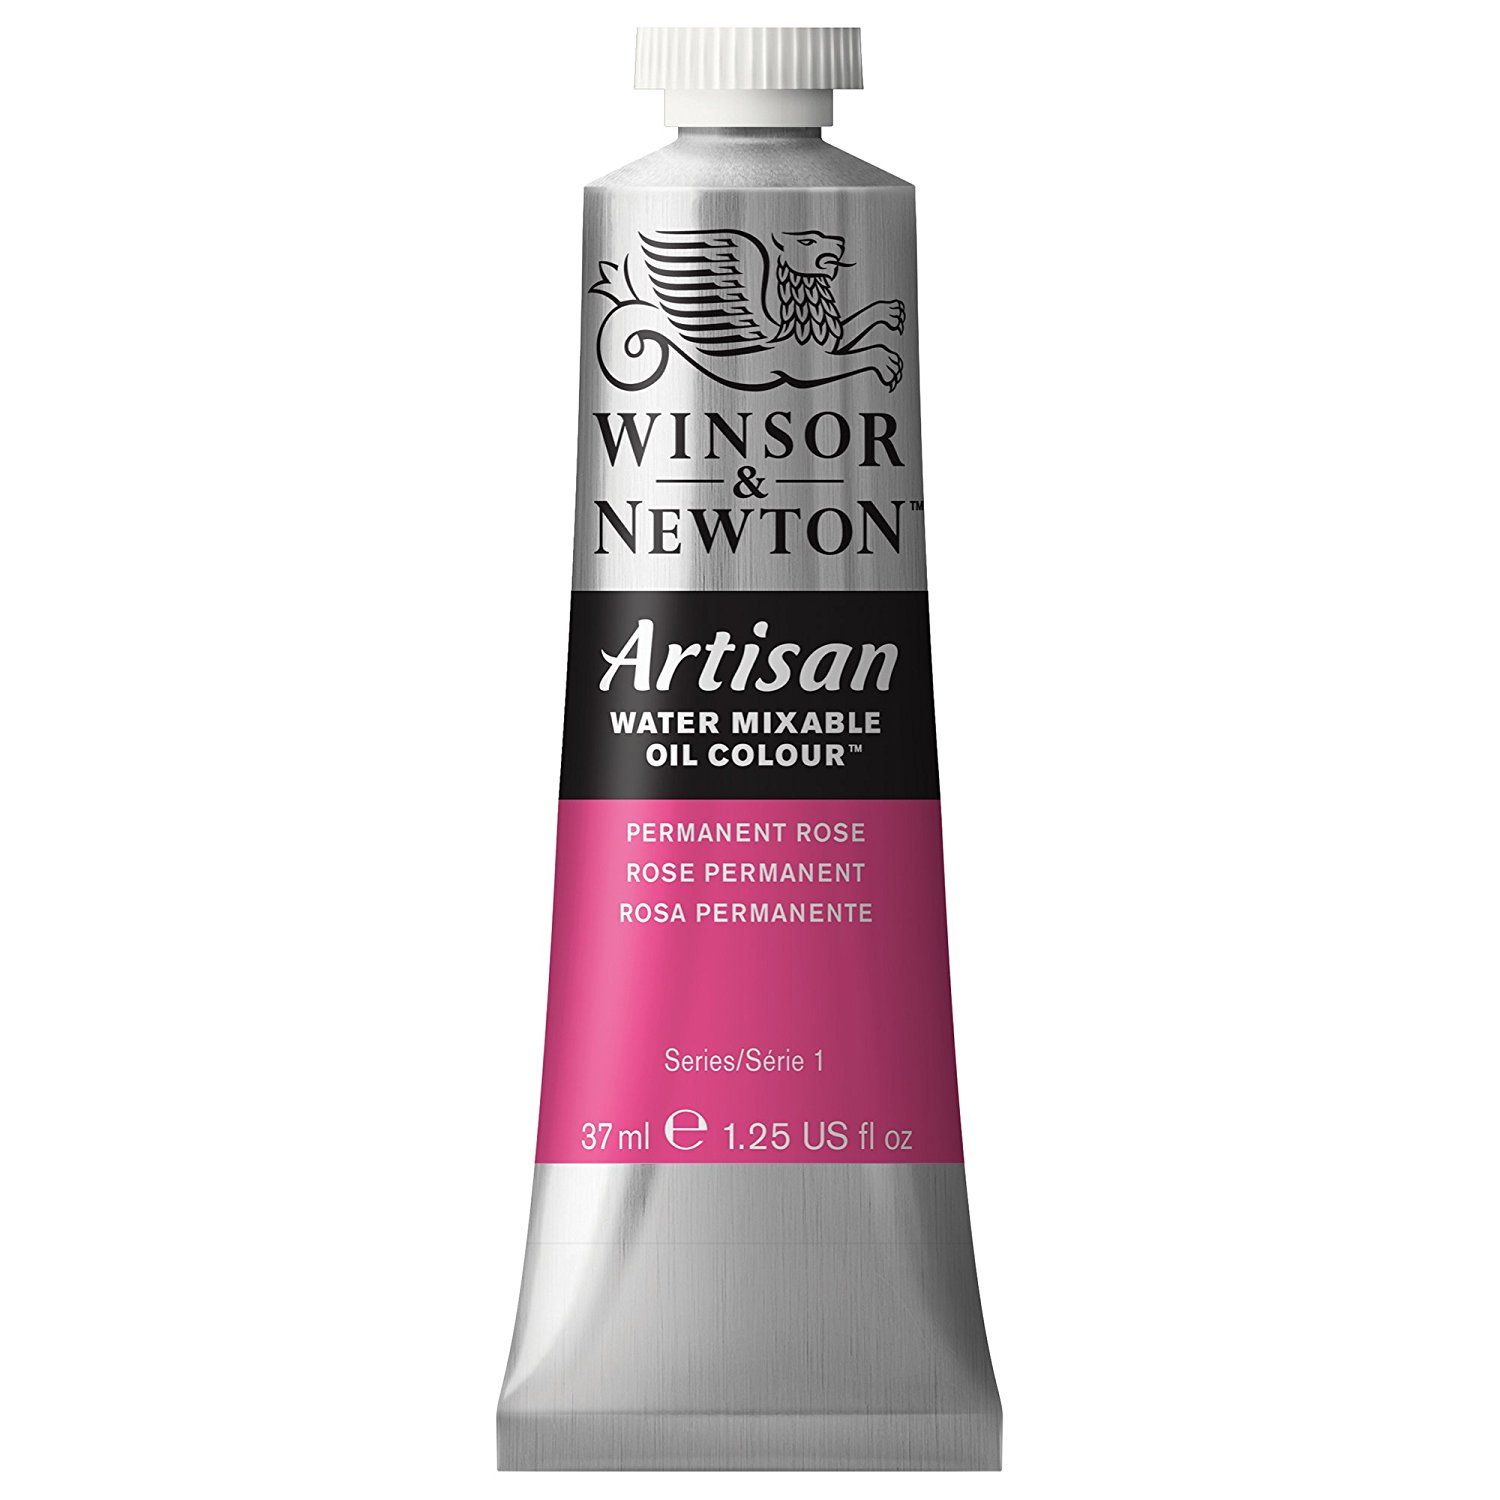 Artisan Water Mixable Oil - Permanent Rose 37ml